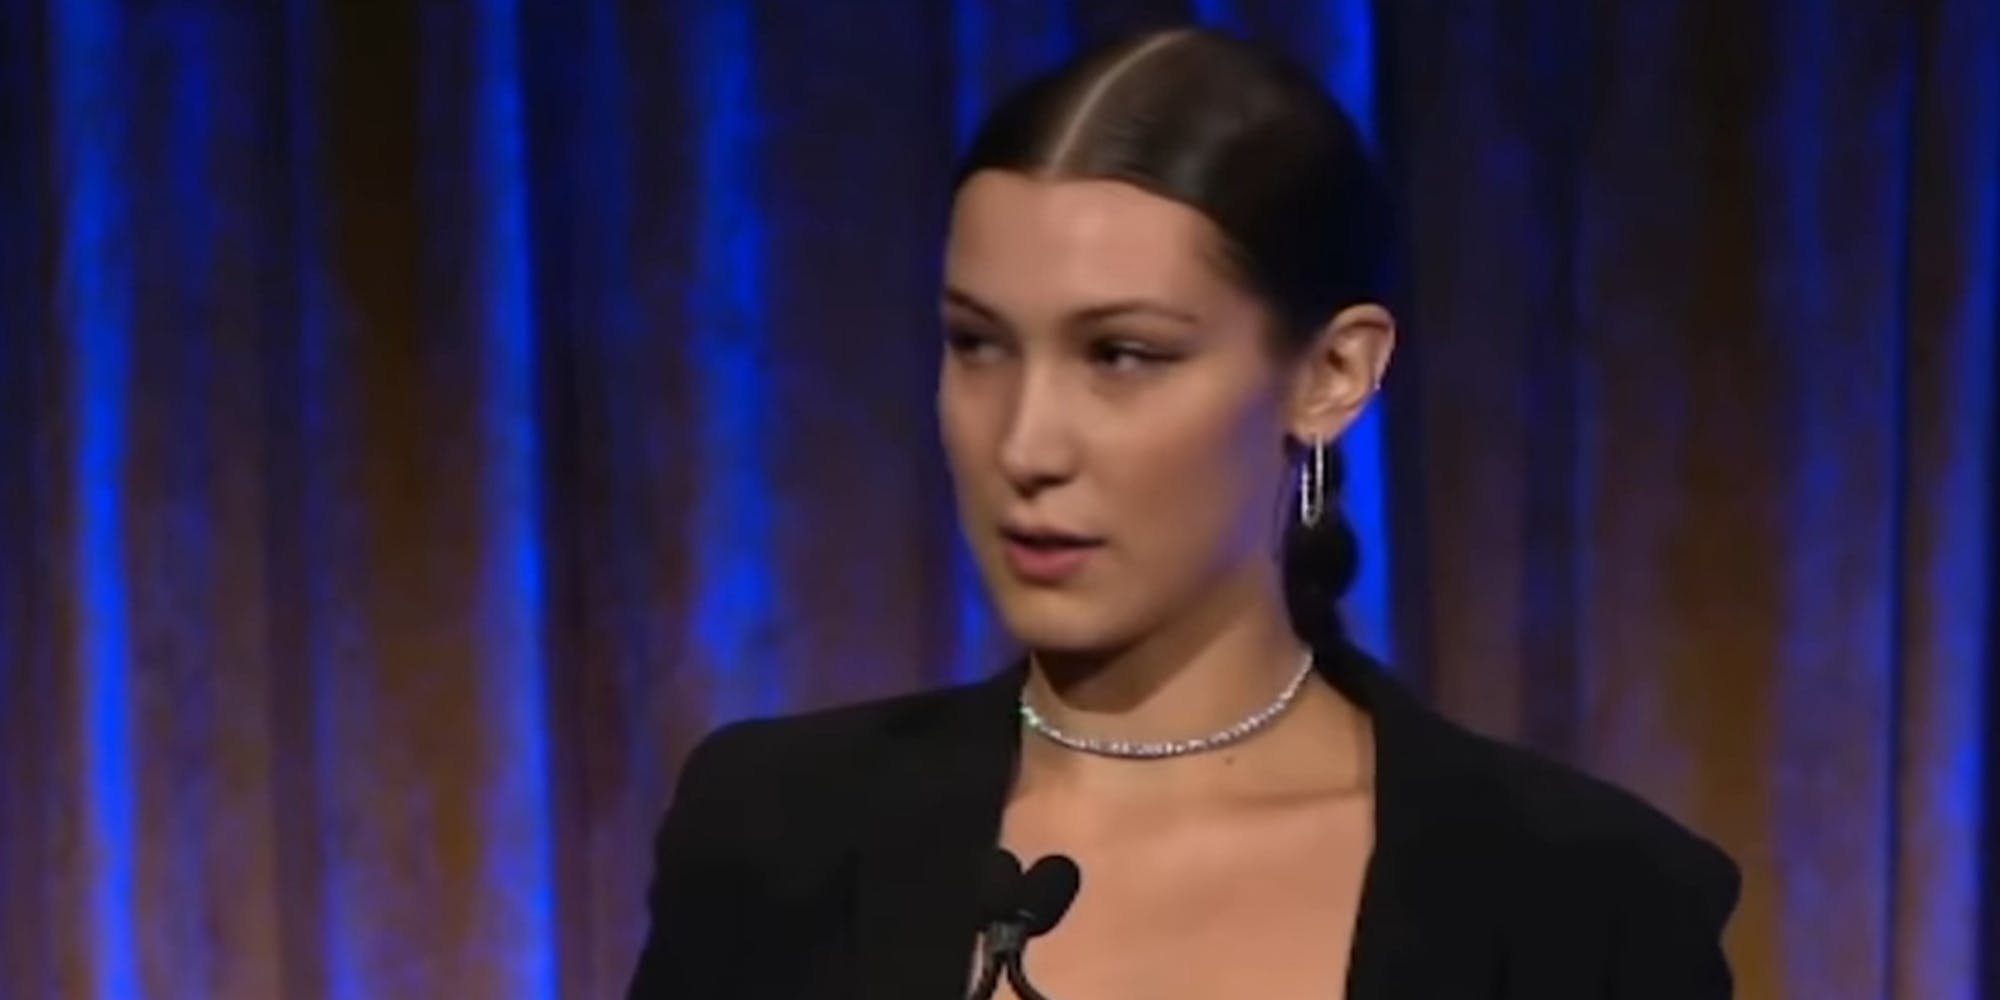 A Bella Hadid deep fake where she recants her support for Palestine was the work of an Israeli jingle maker